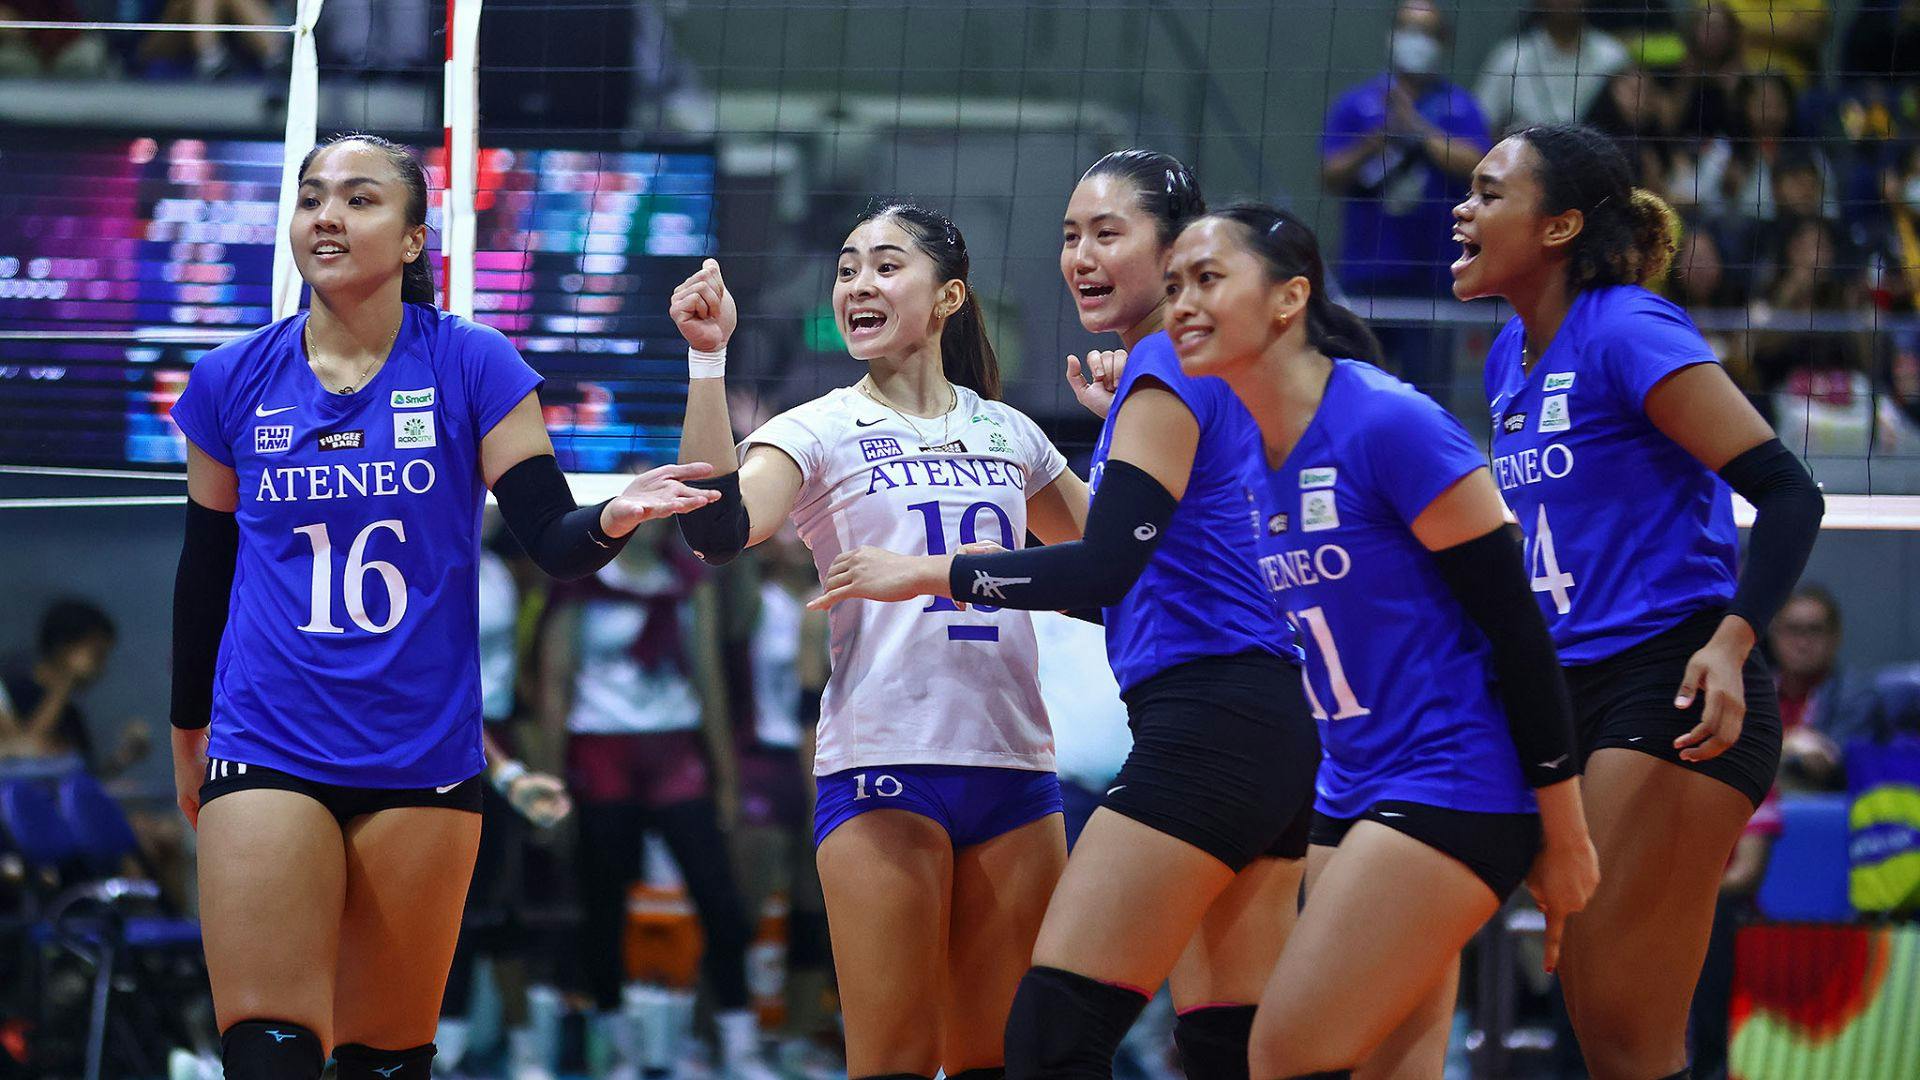 UAAP: What changed for Ateneo in round 2? Roma Doromal, Zel Tsunashima get honest after clean sweep of UP